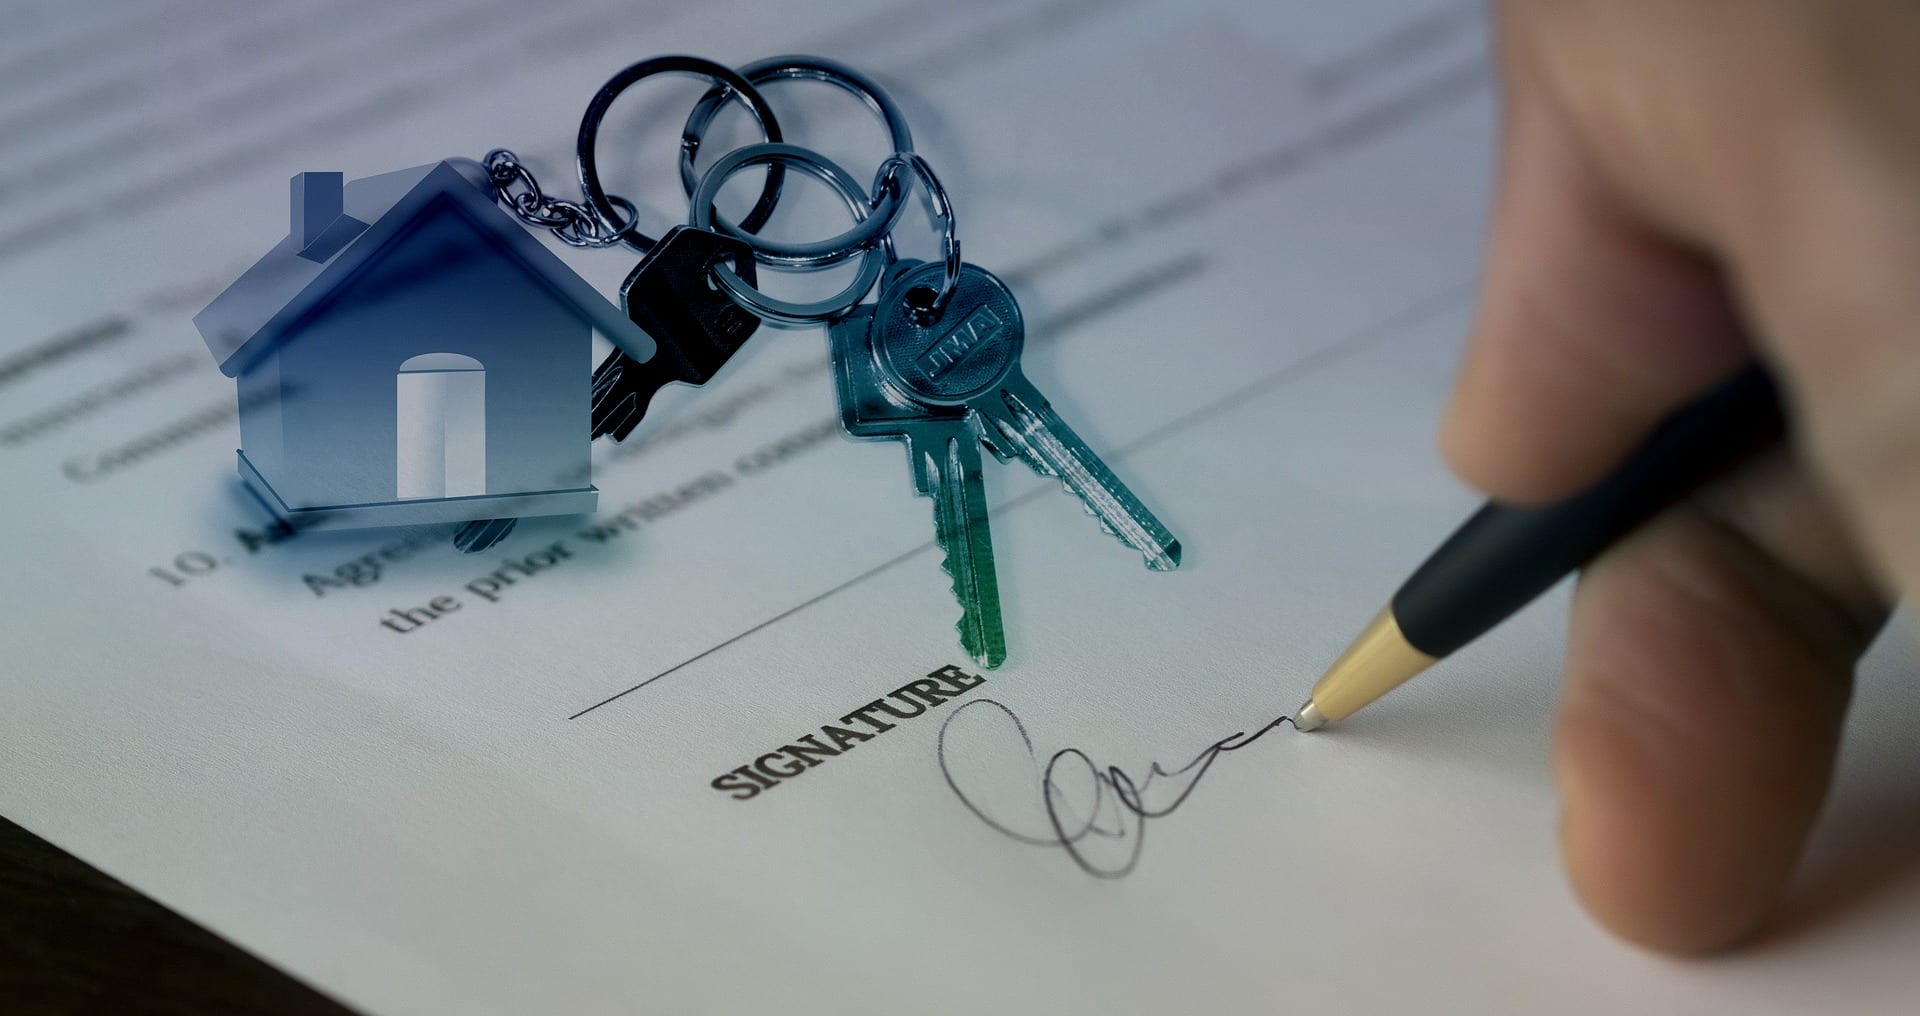 Keyring with small house on it sitting on top of purchase contract as man signs it; image by geralt, via Pixabay, no changes made.